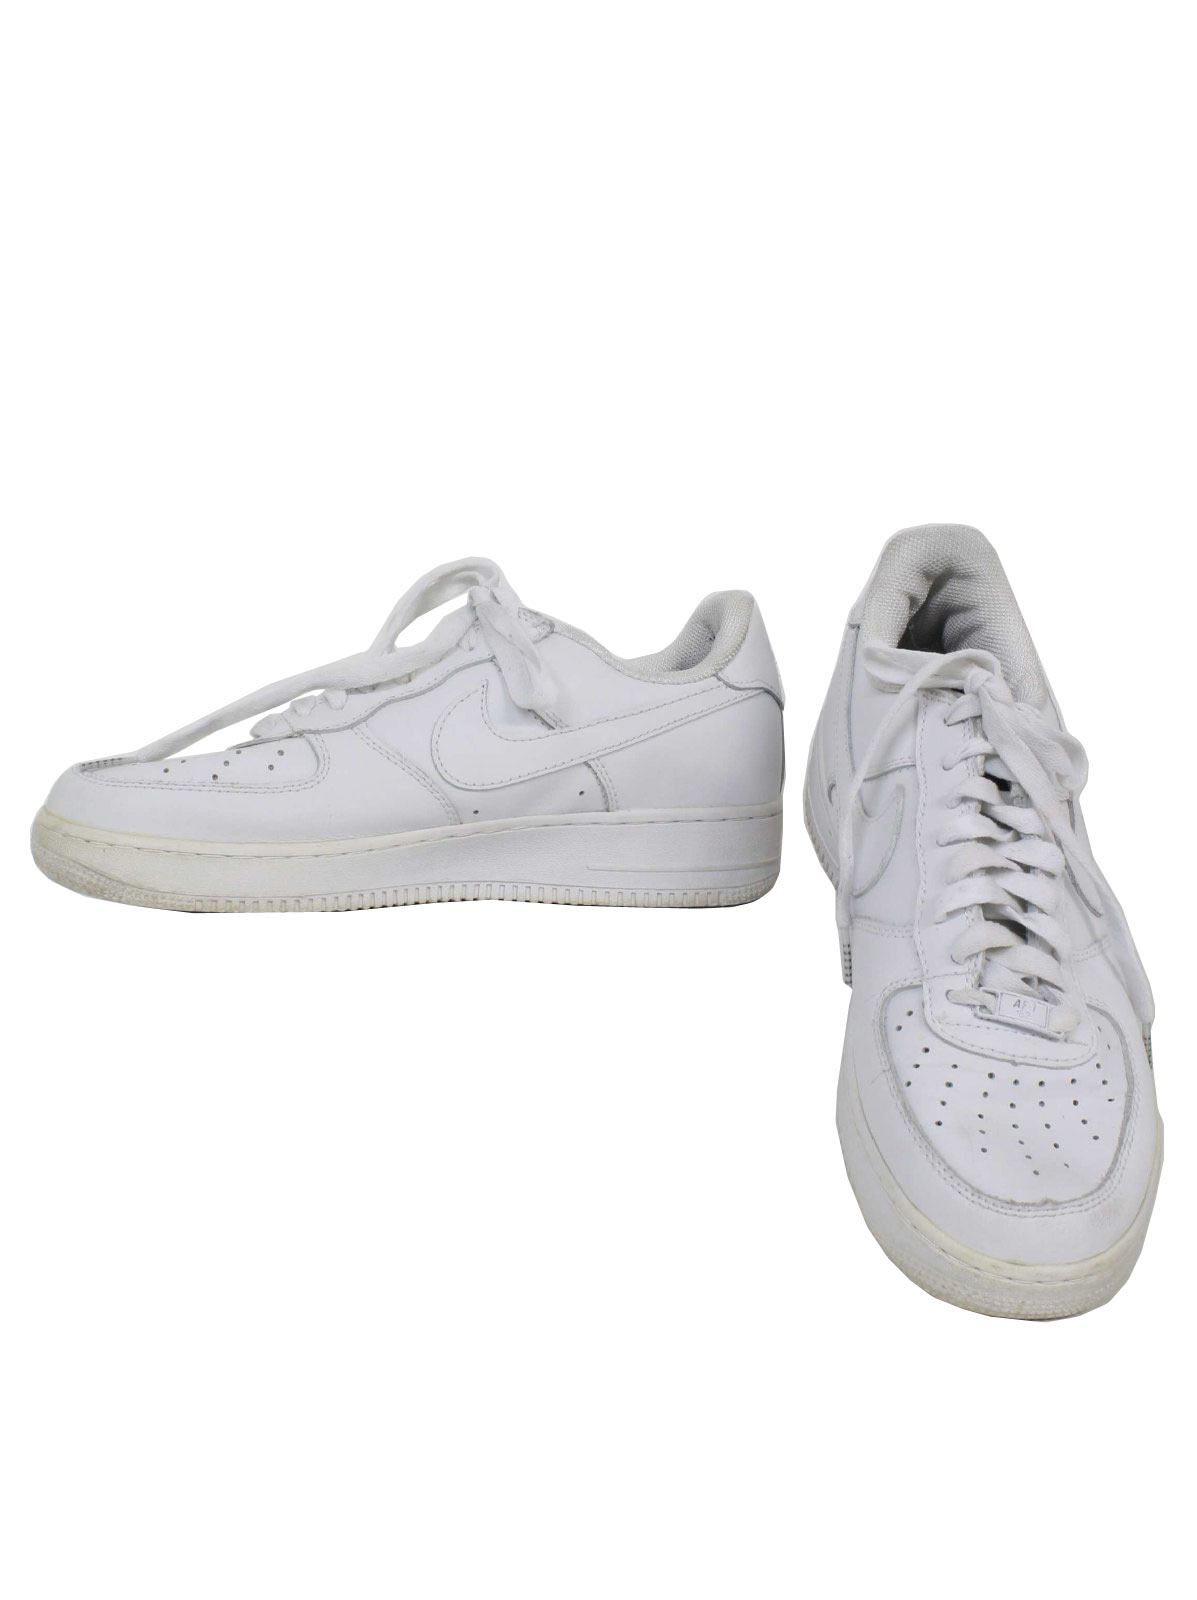 Buy Online old nike air force Cheap 